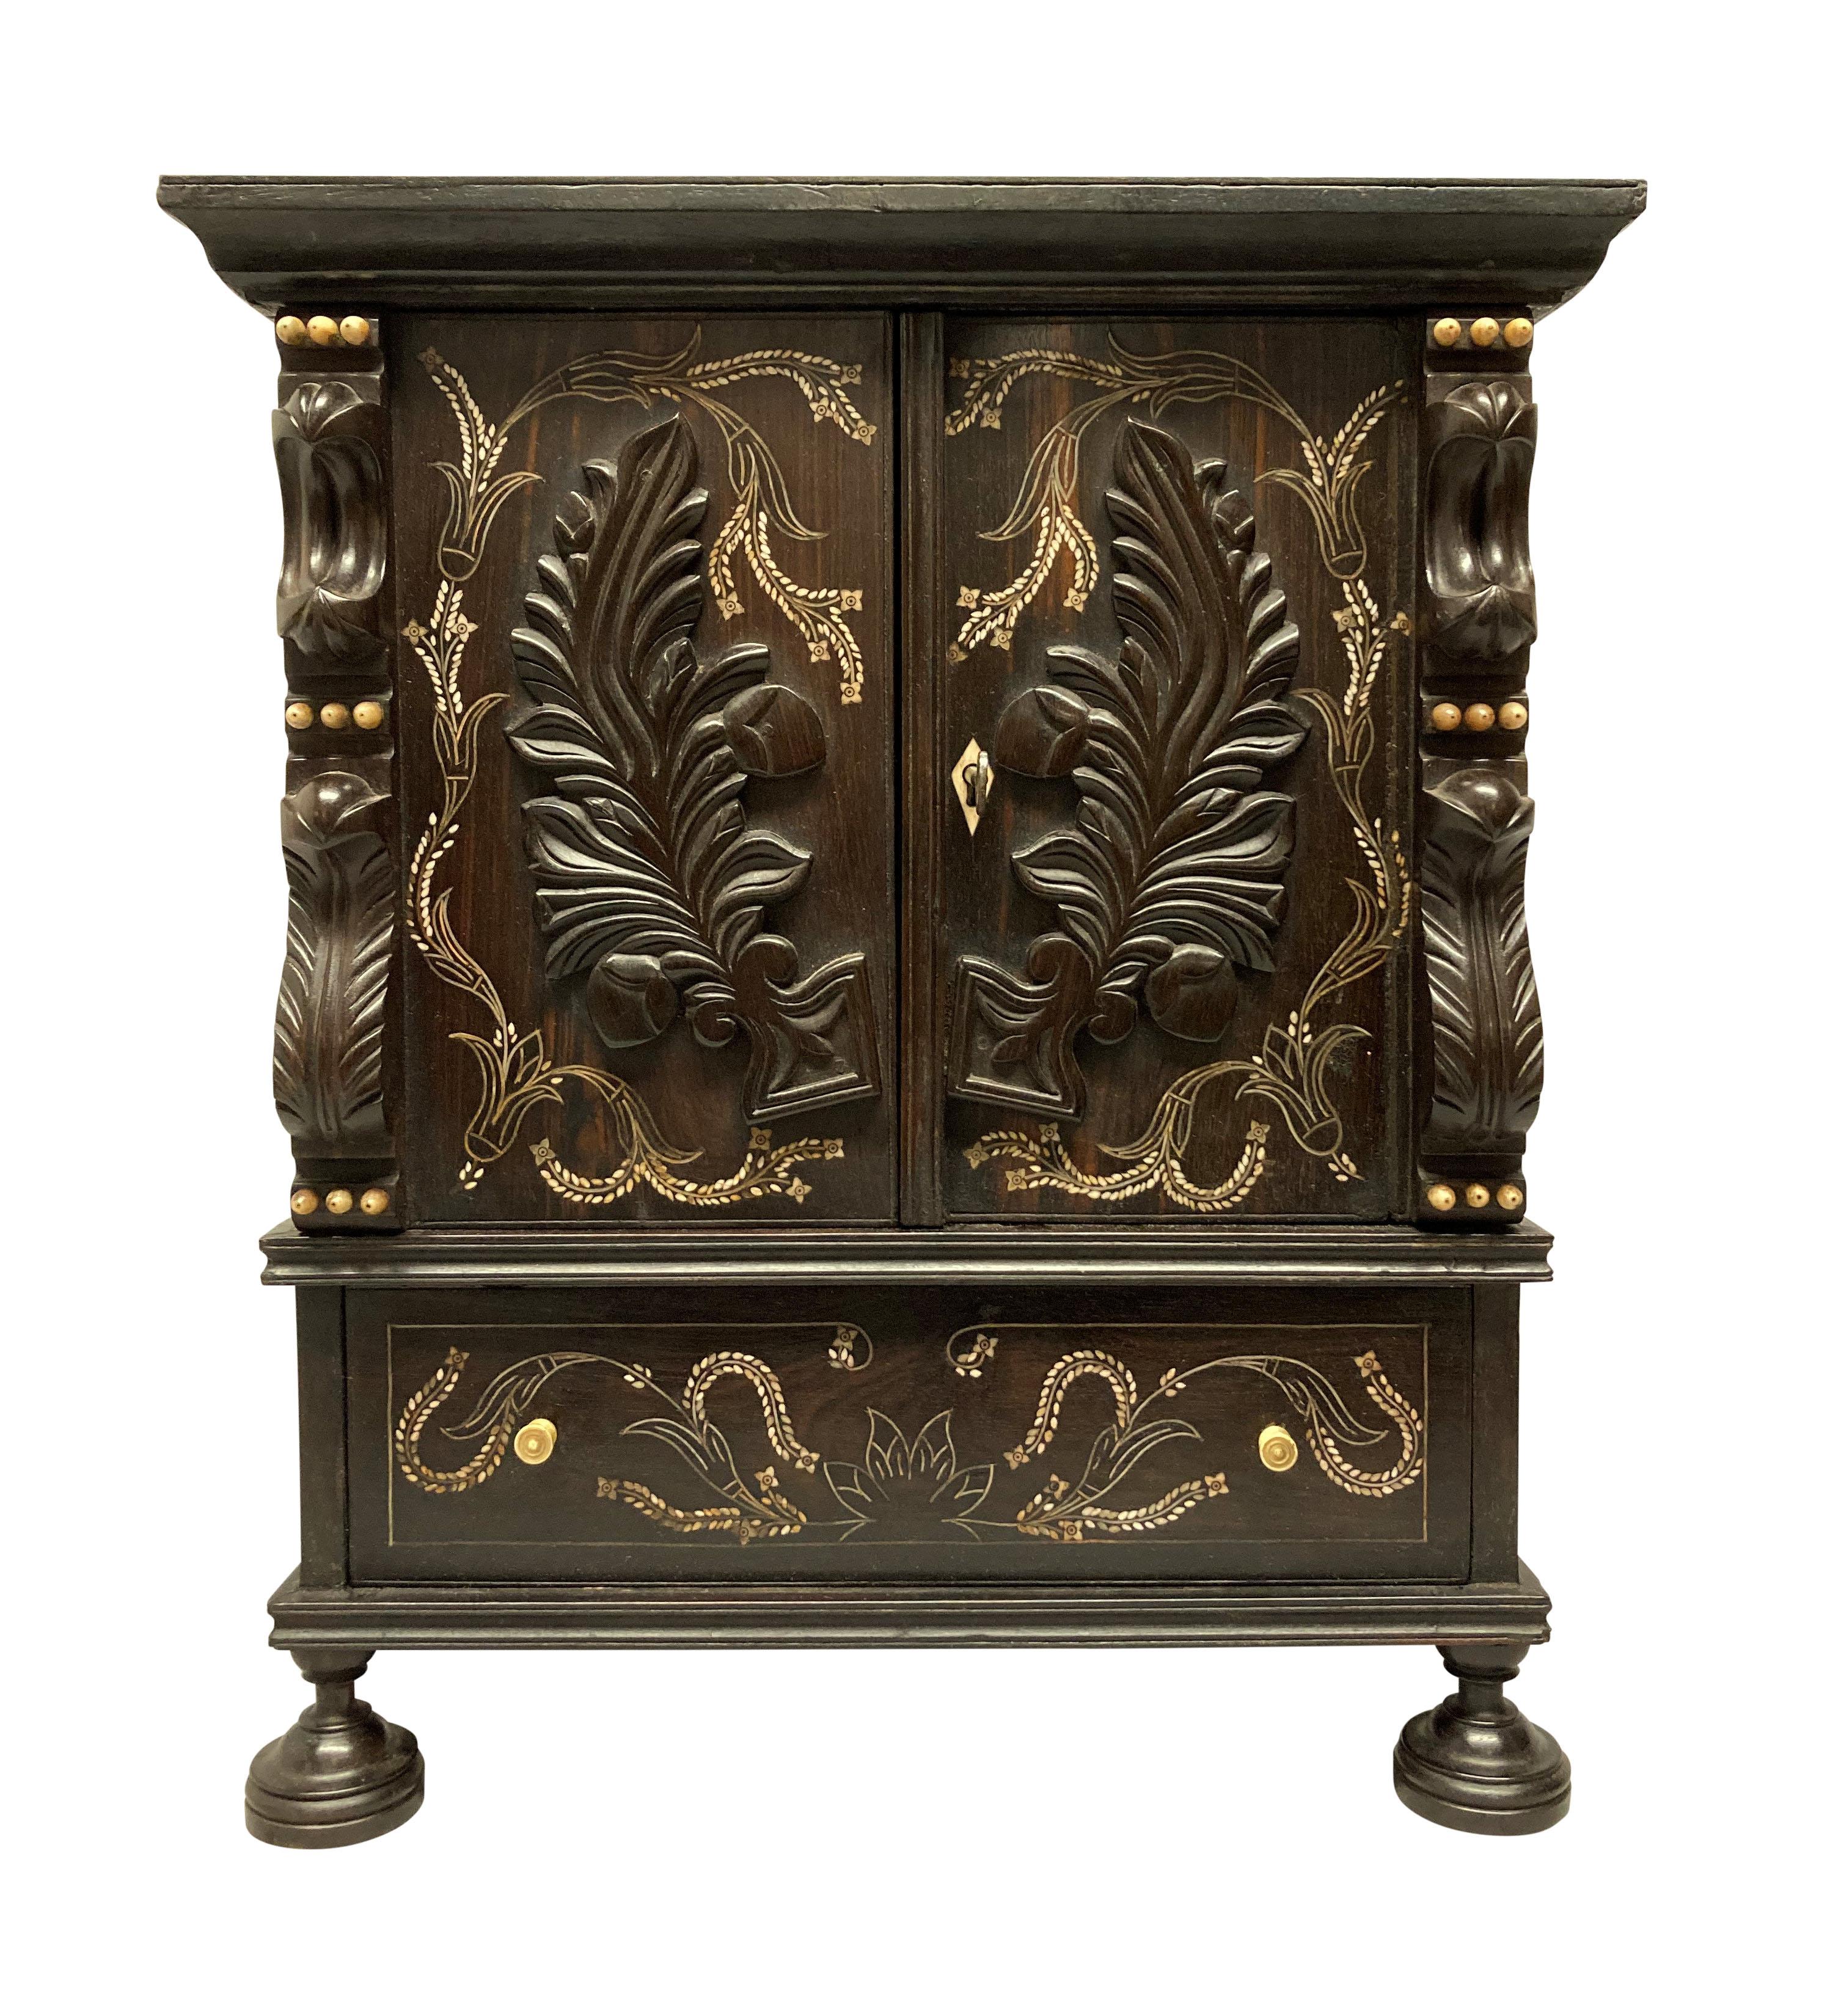 An unusual and beautifully carved Anglo-Indian small cabinet, with a fitted interior, lined in velvet and a fall front hidden cupboard. Carved from solid ebony and inlaid throughtout in bone.